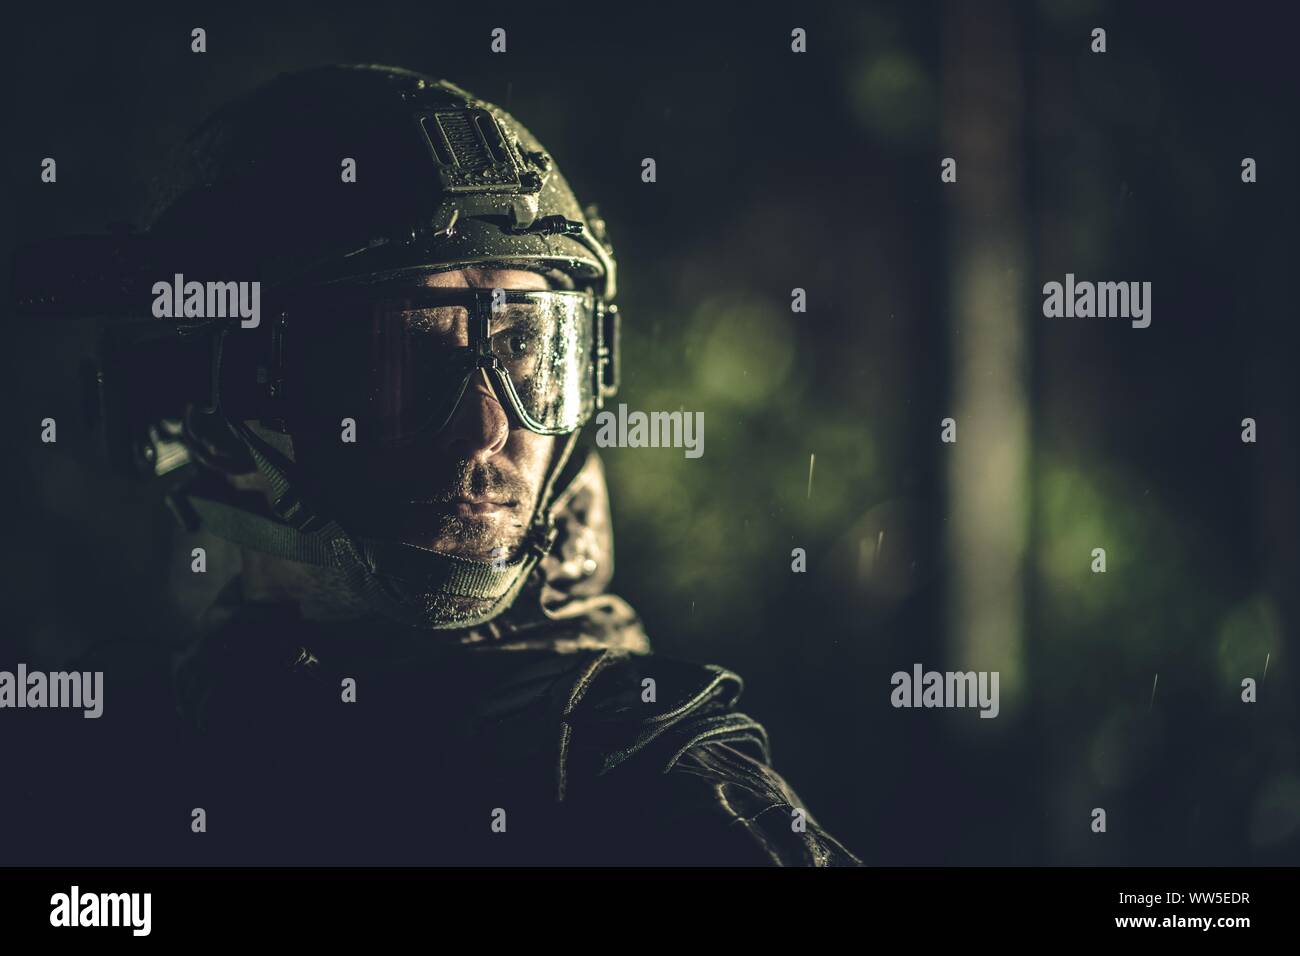 Modern Battle Field Soldier Portrait. Dirty and Wet Men Face. Military Theme. Stock Photo